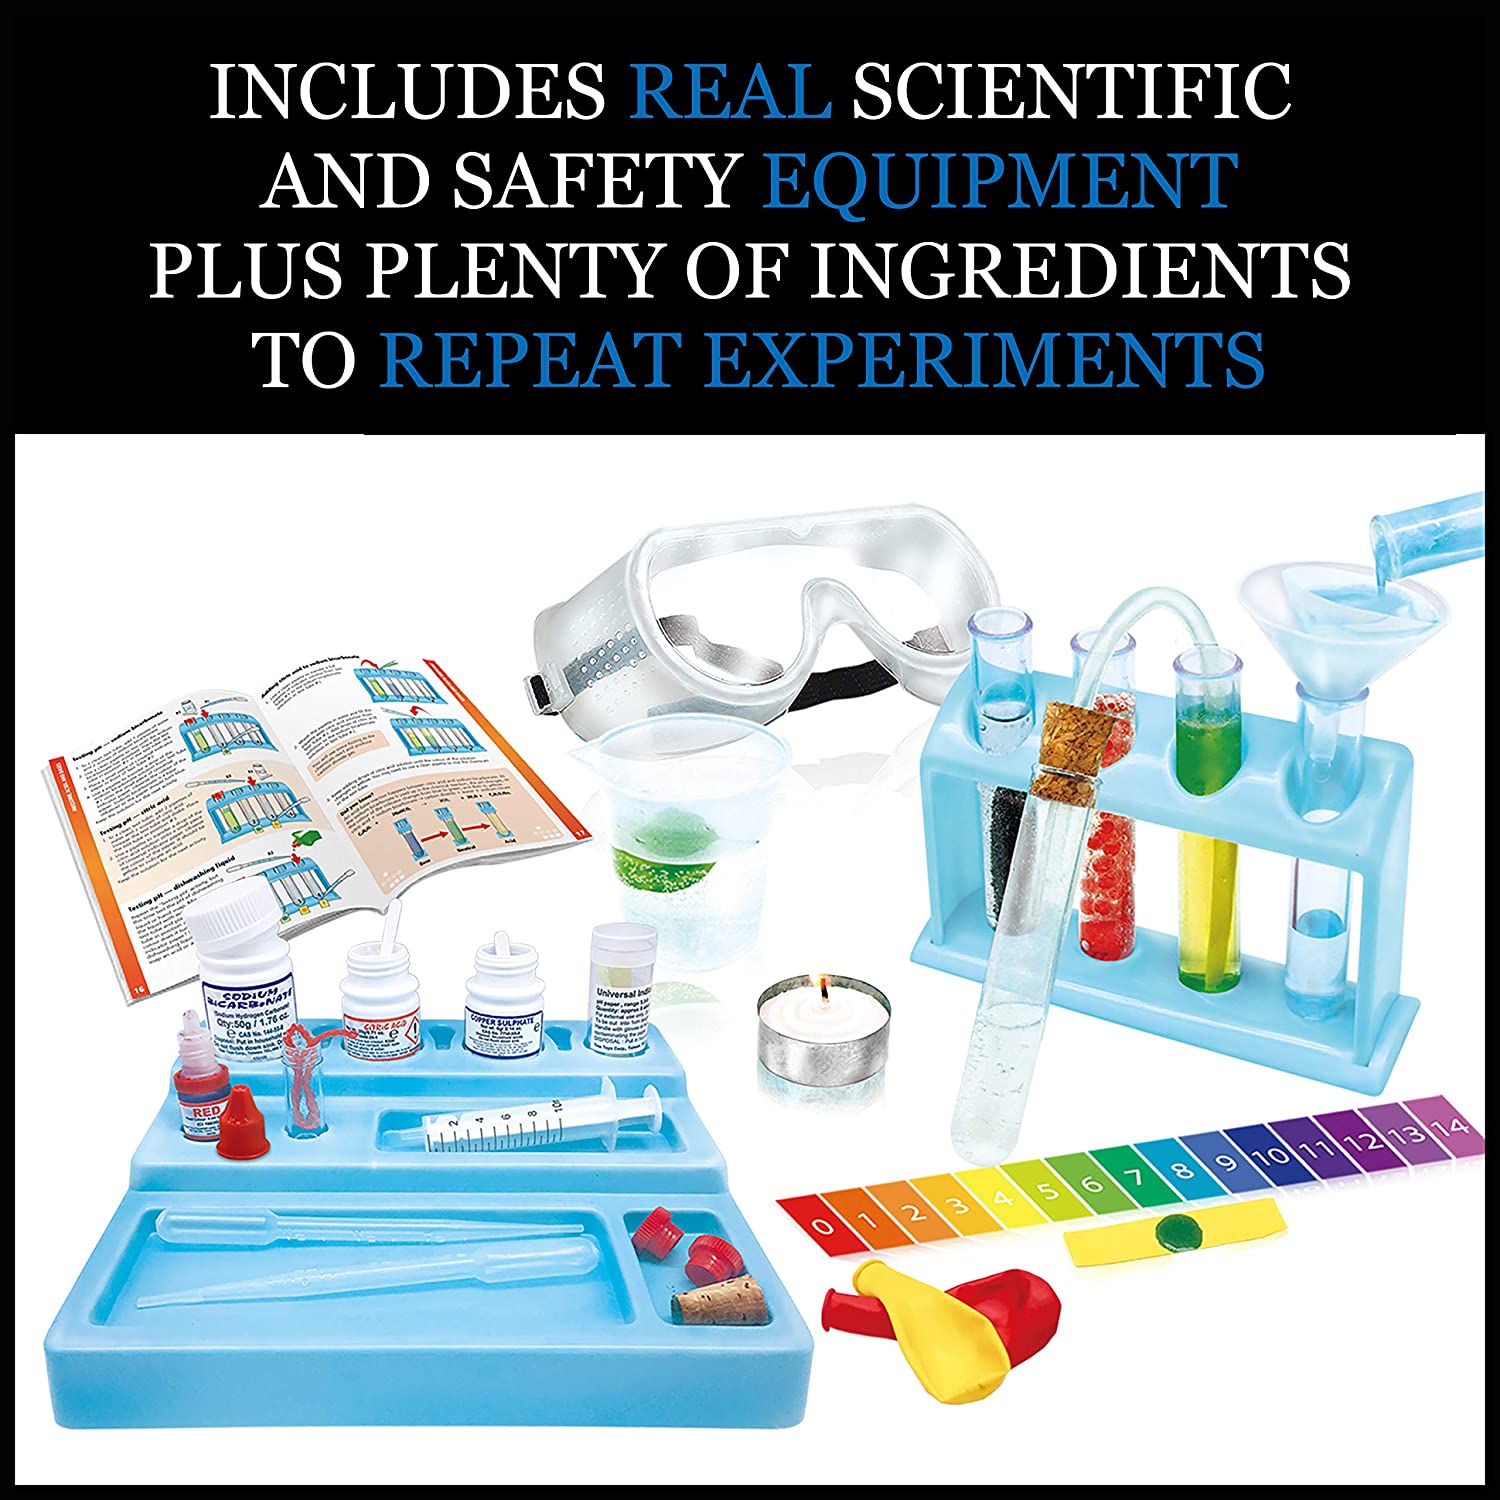 WILD ENVIRONMENTAL SCIENCE Test Tube Chemistry Lab - 50+ Science Experiments and Reactions - Ages 8+ - Learn About Solids, Liquids, Gases and More!